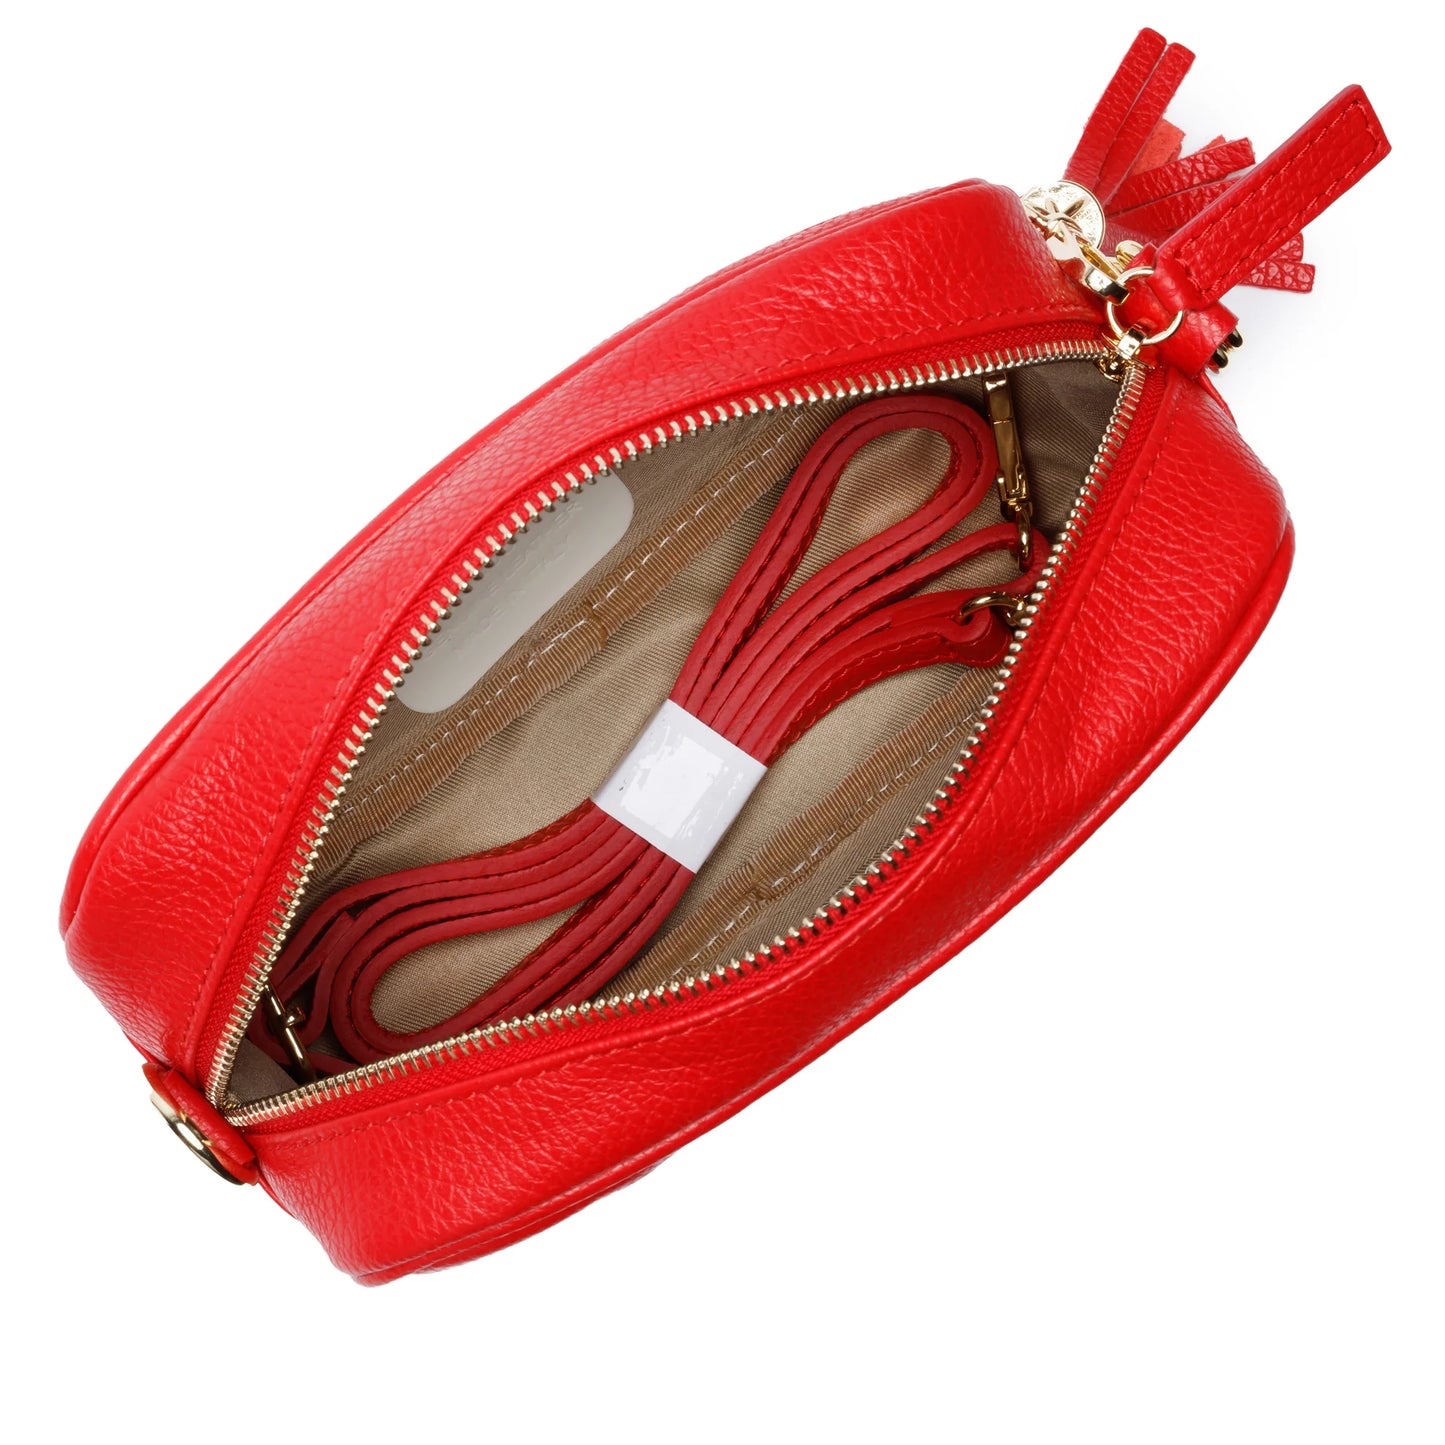 Elie Beaumont Red Leather Crossbody Bag